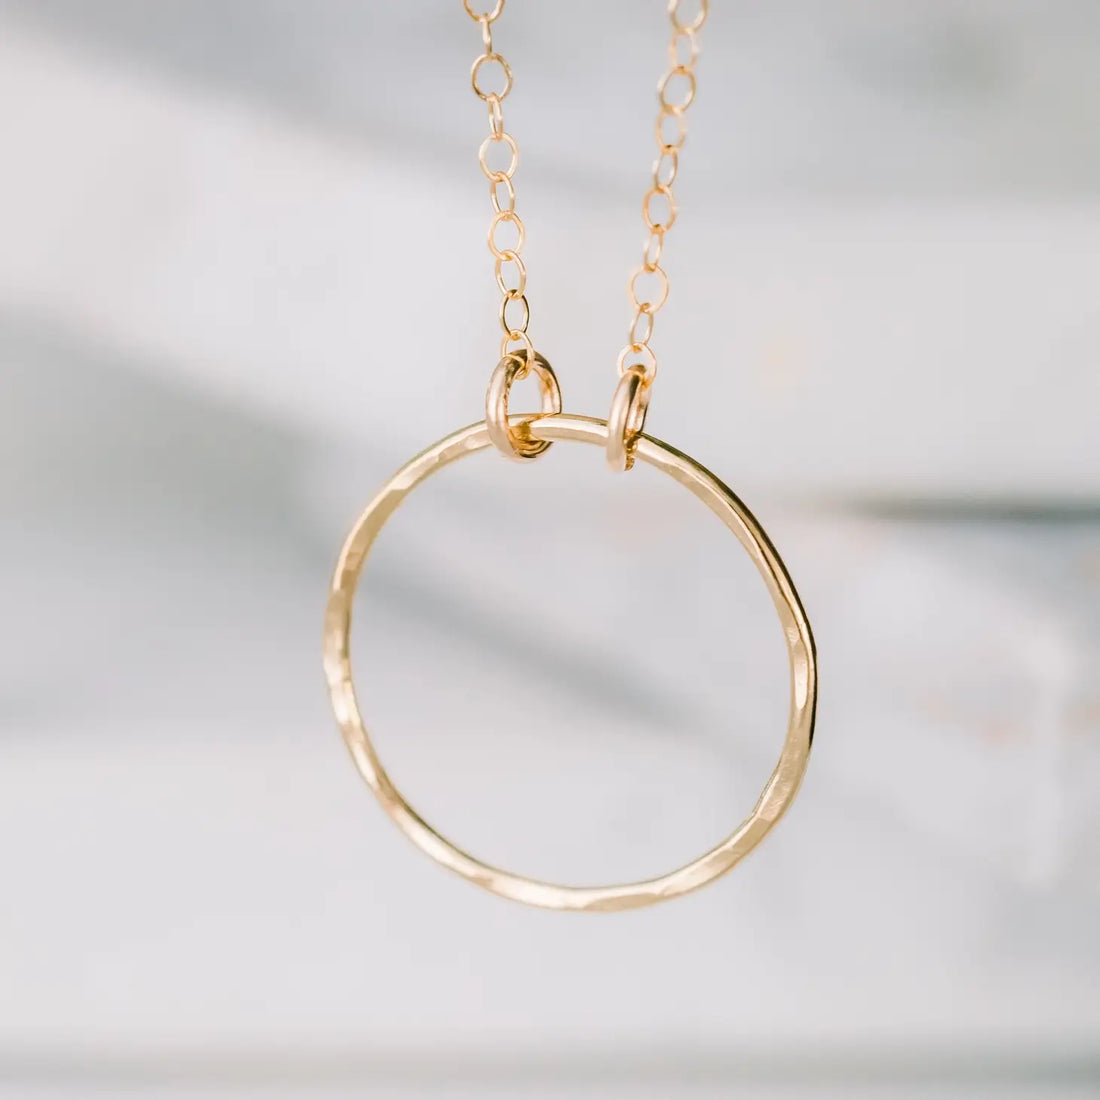 Open Ring Necklace